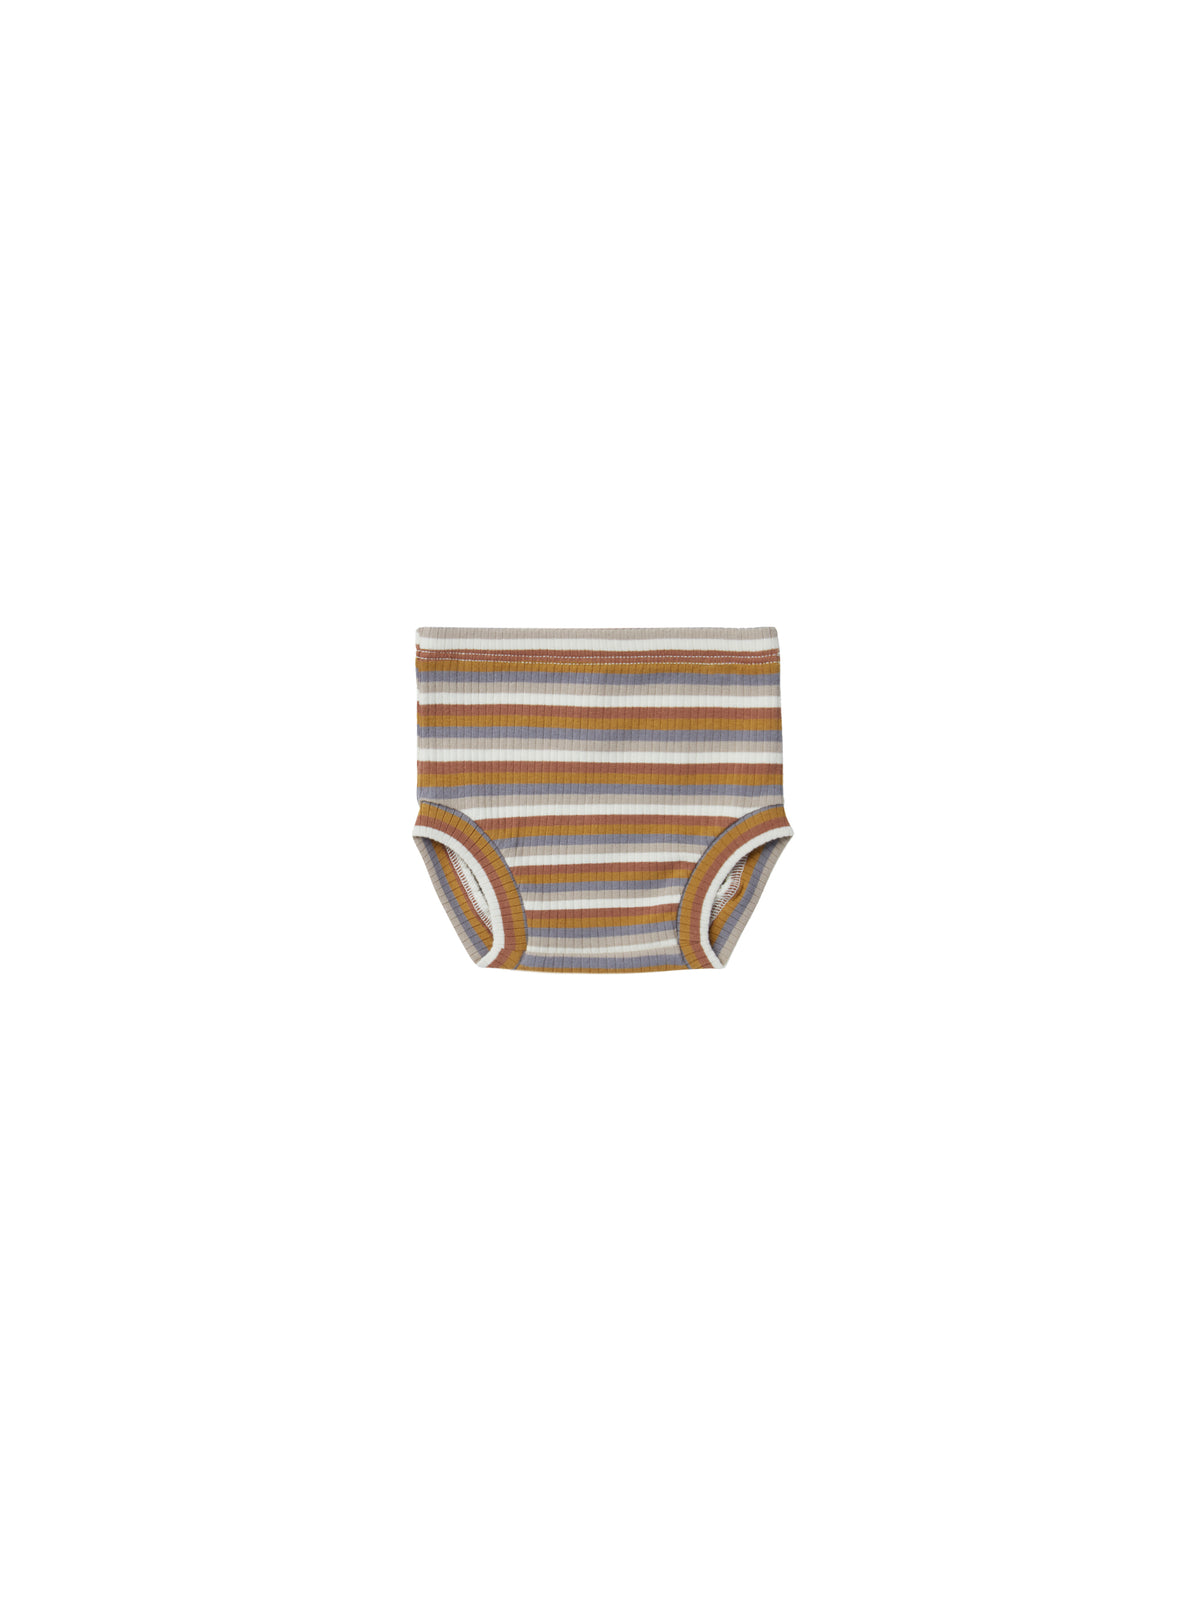 Quincy Mae Ribbed Bloomer - Multi-Stripe